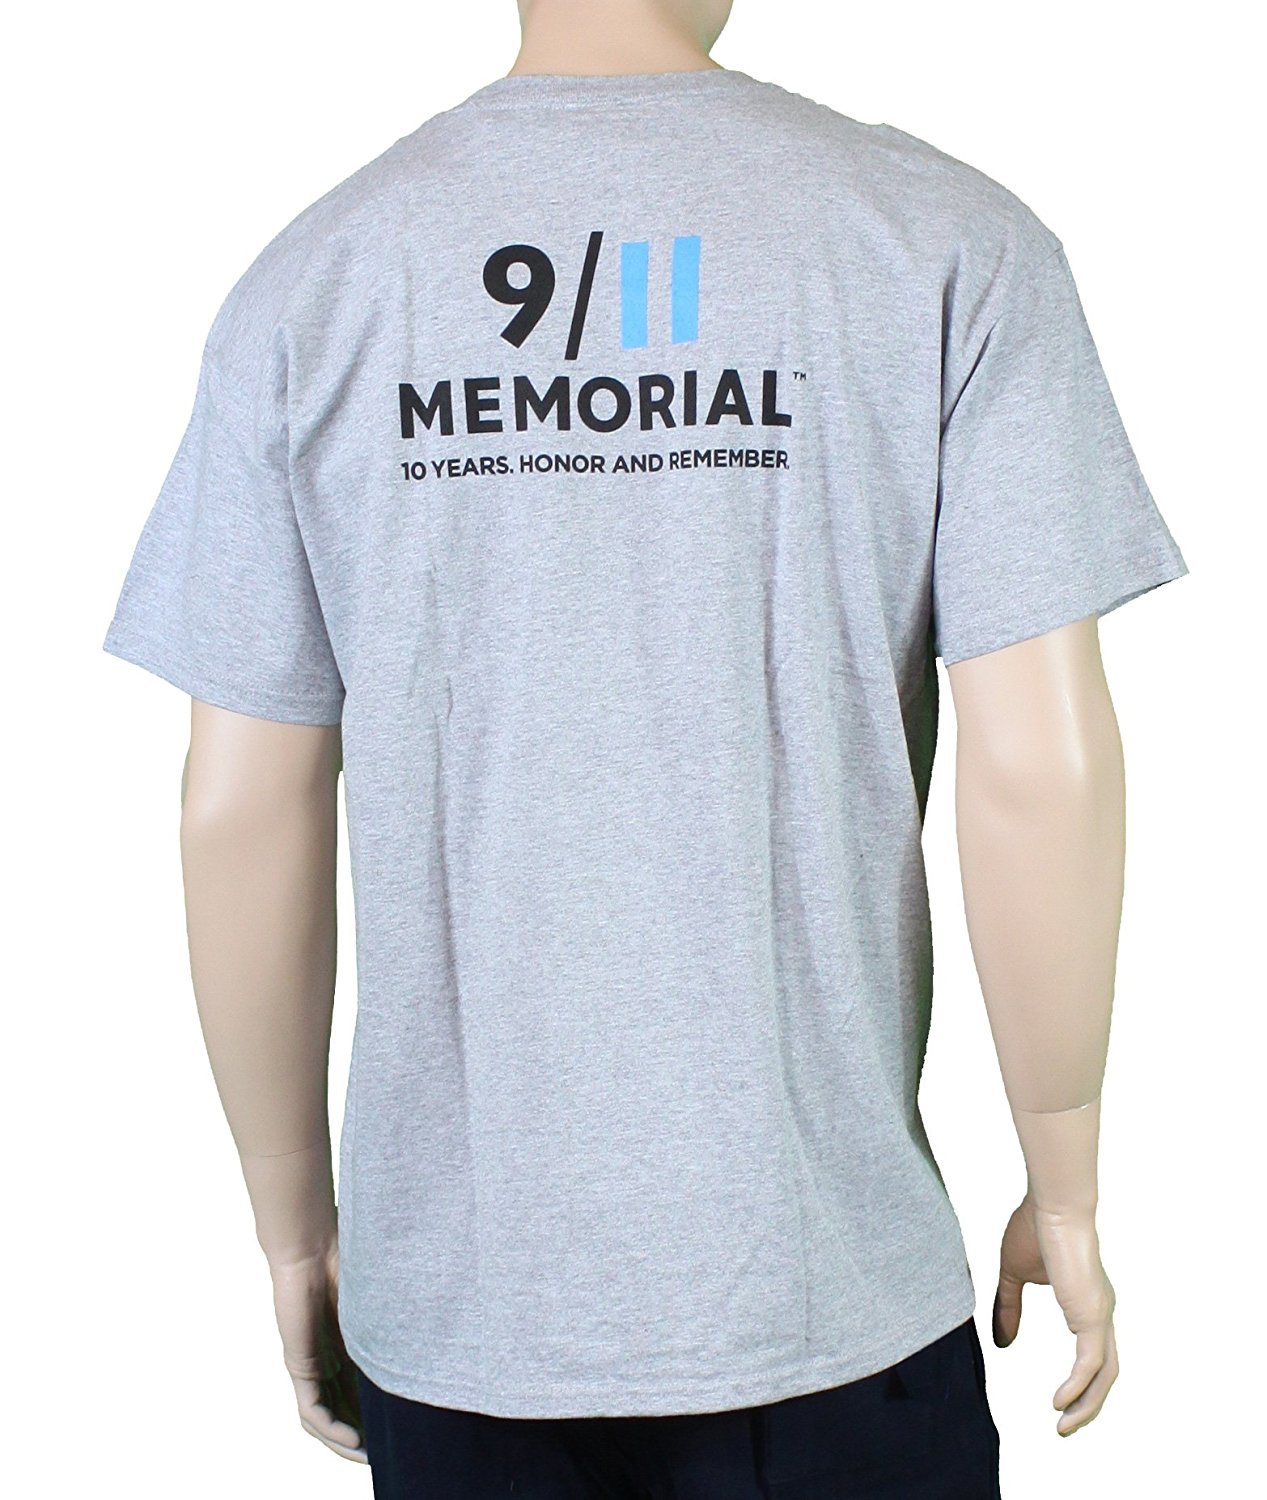 9/11 Official Licensed Memorial NYPD Short Sleeve T-Shirt Gray